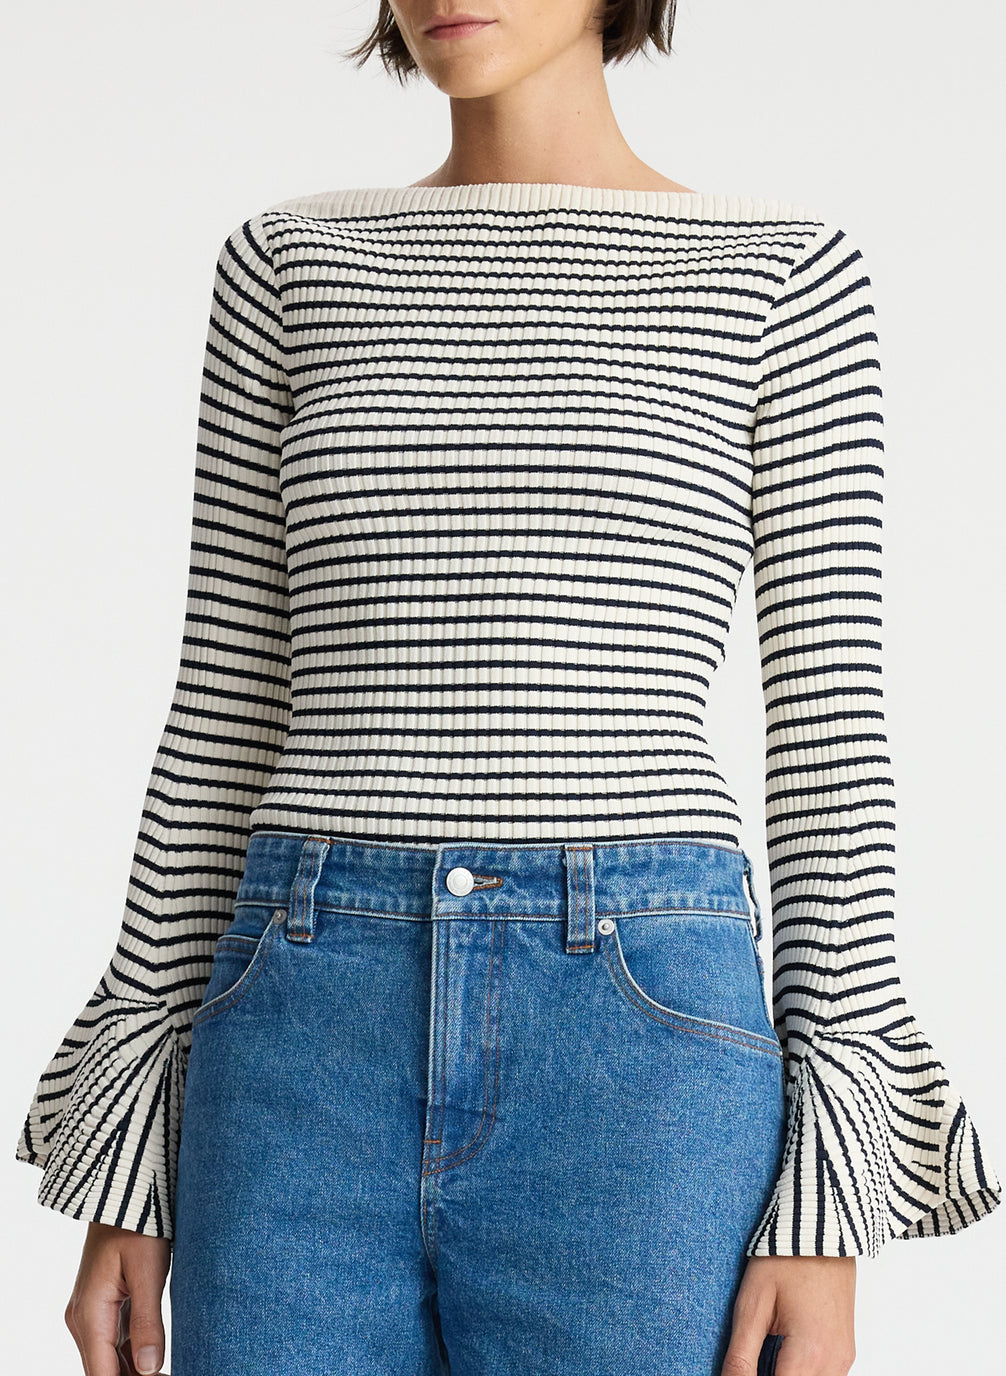 front view of woman wearing striped long bell sleeve knit top and medium blue wash denim jeans